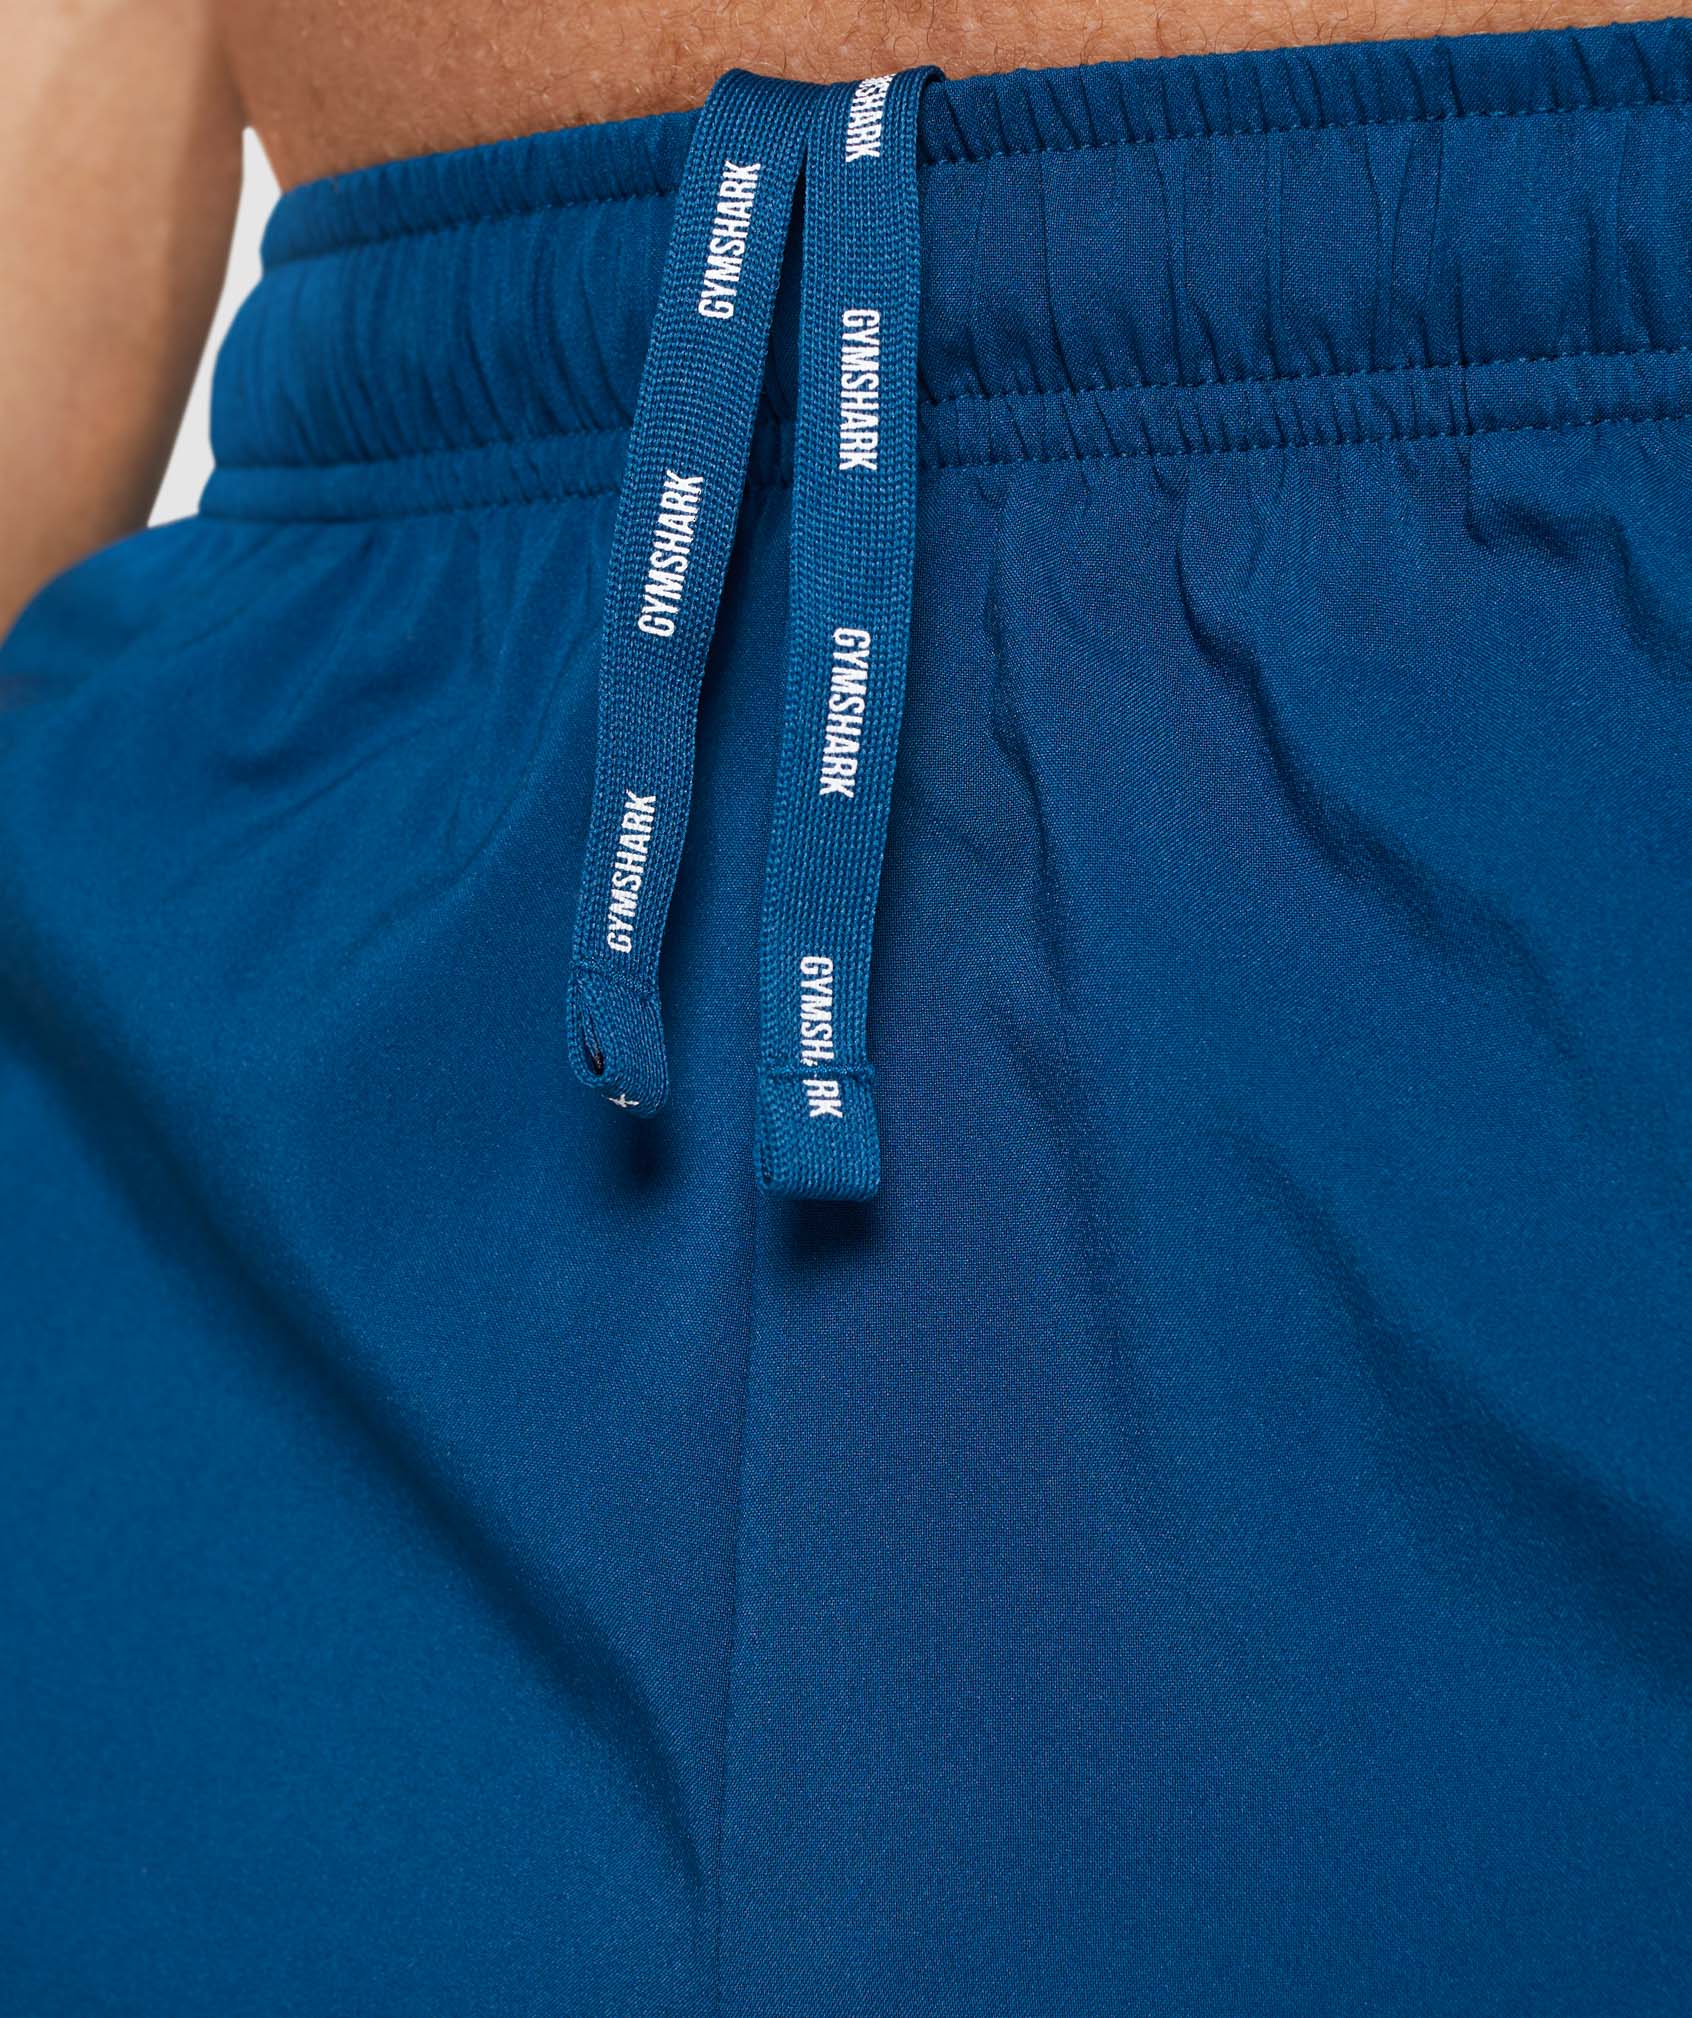 Arrival Shorts in Petrol Blue - view 7